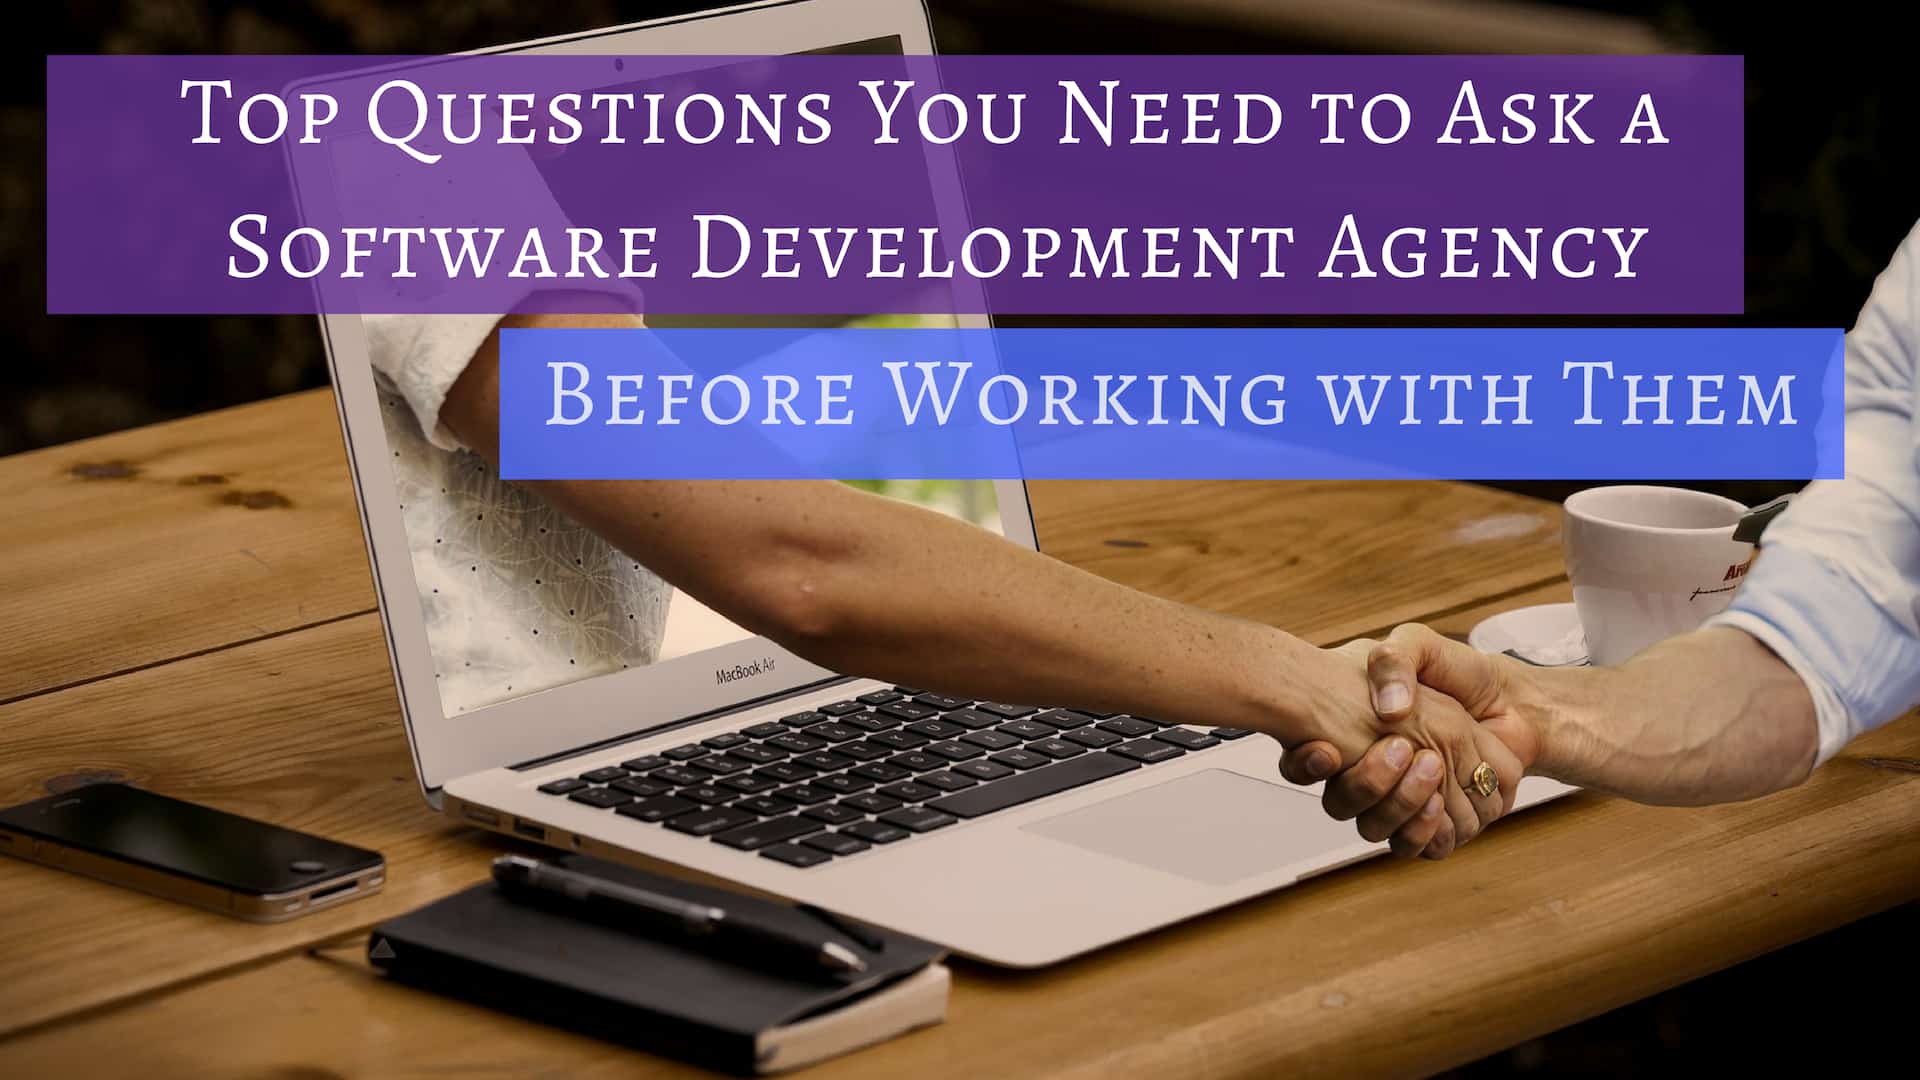 Top Questions You Need To Ask A Software Development Agency Before Working With Them